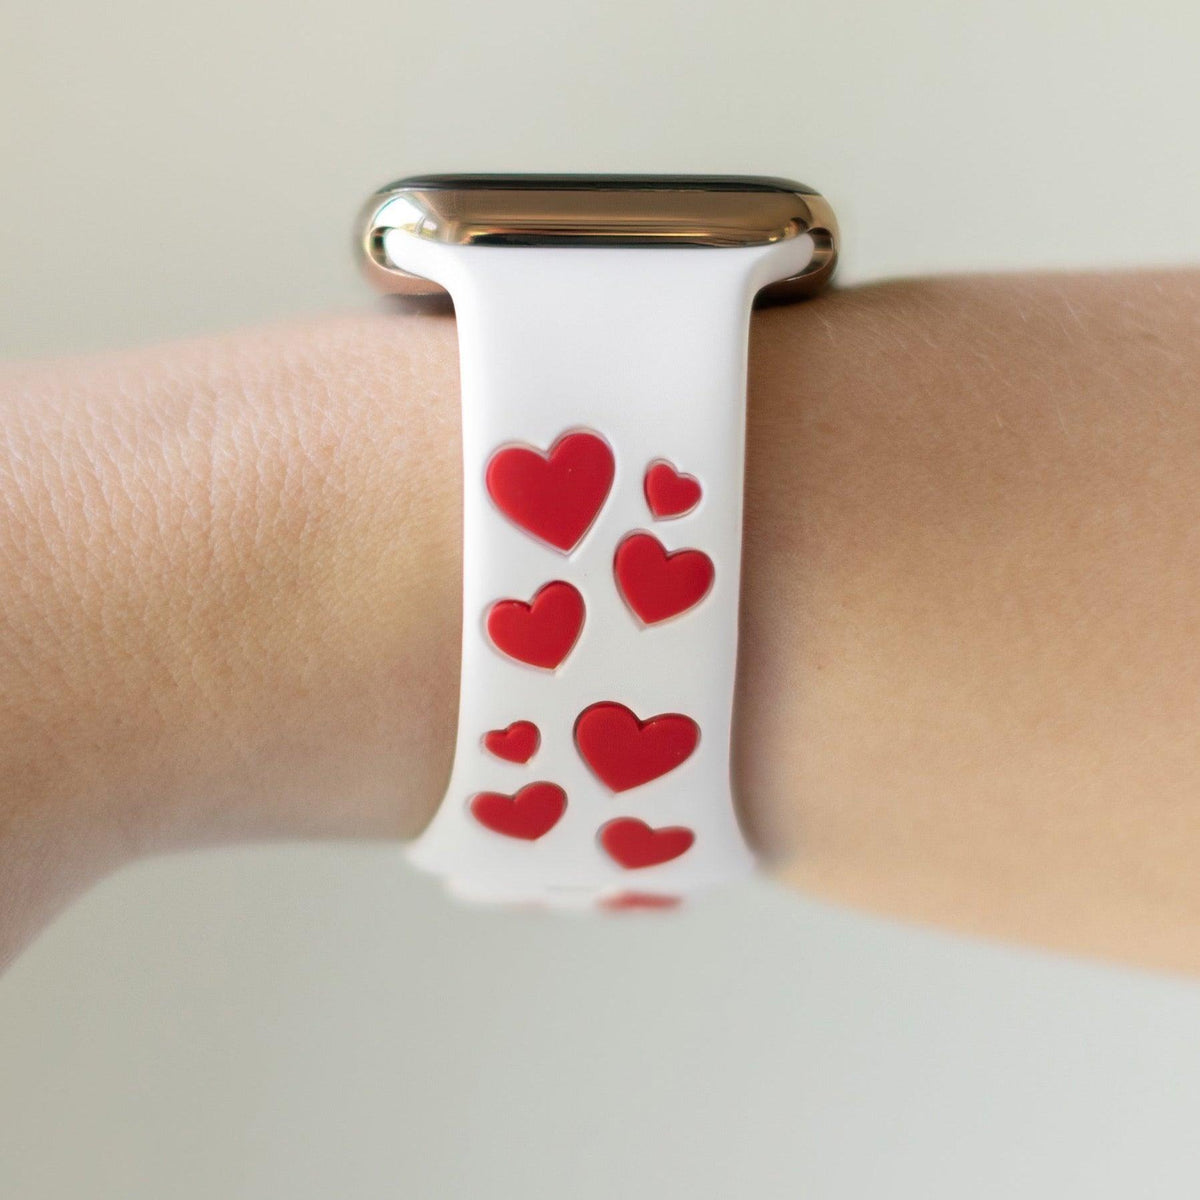 White & Red Love & Luxe Apple Watch Band - Strawberry Avocados